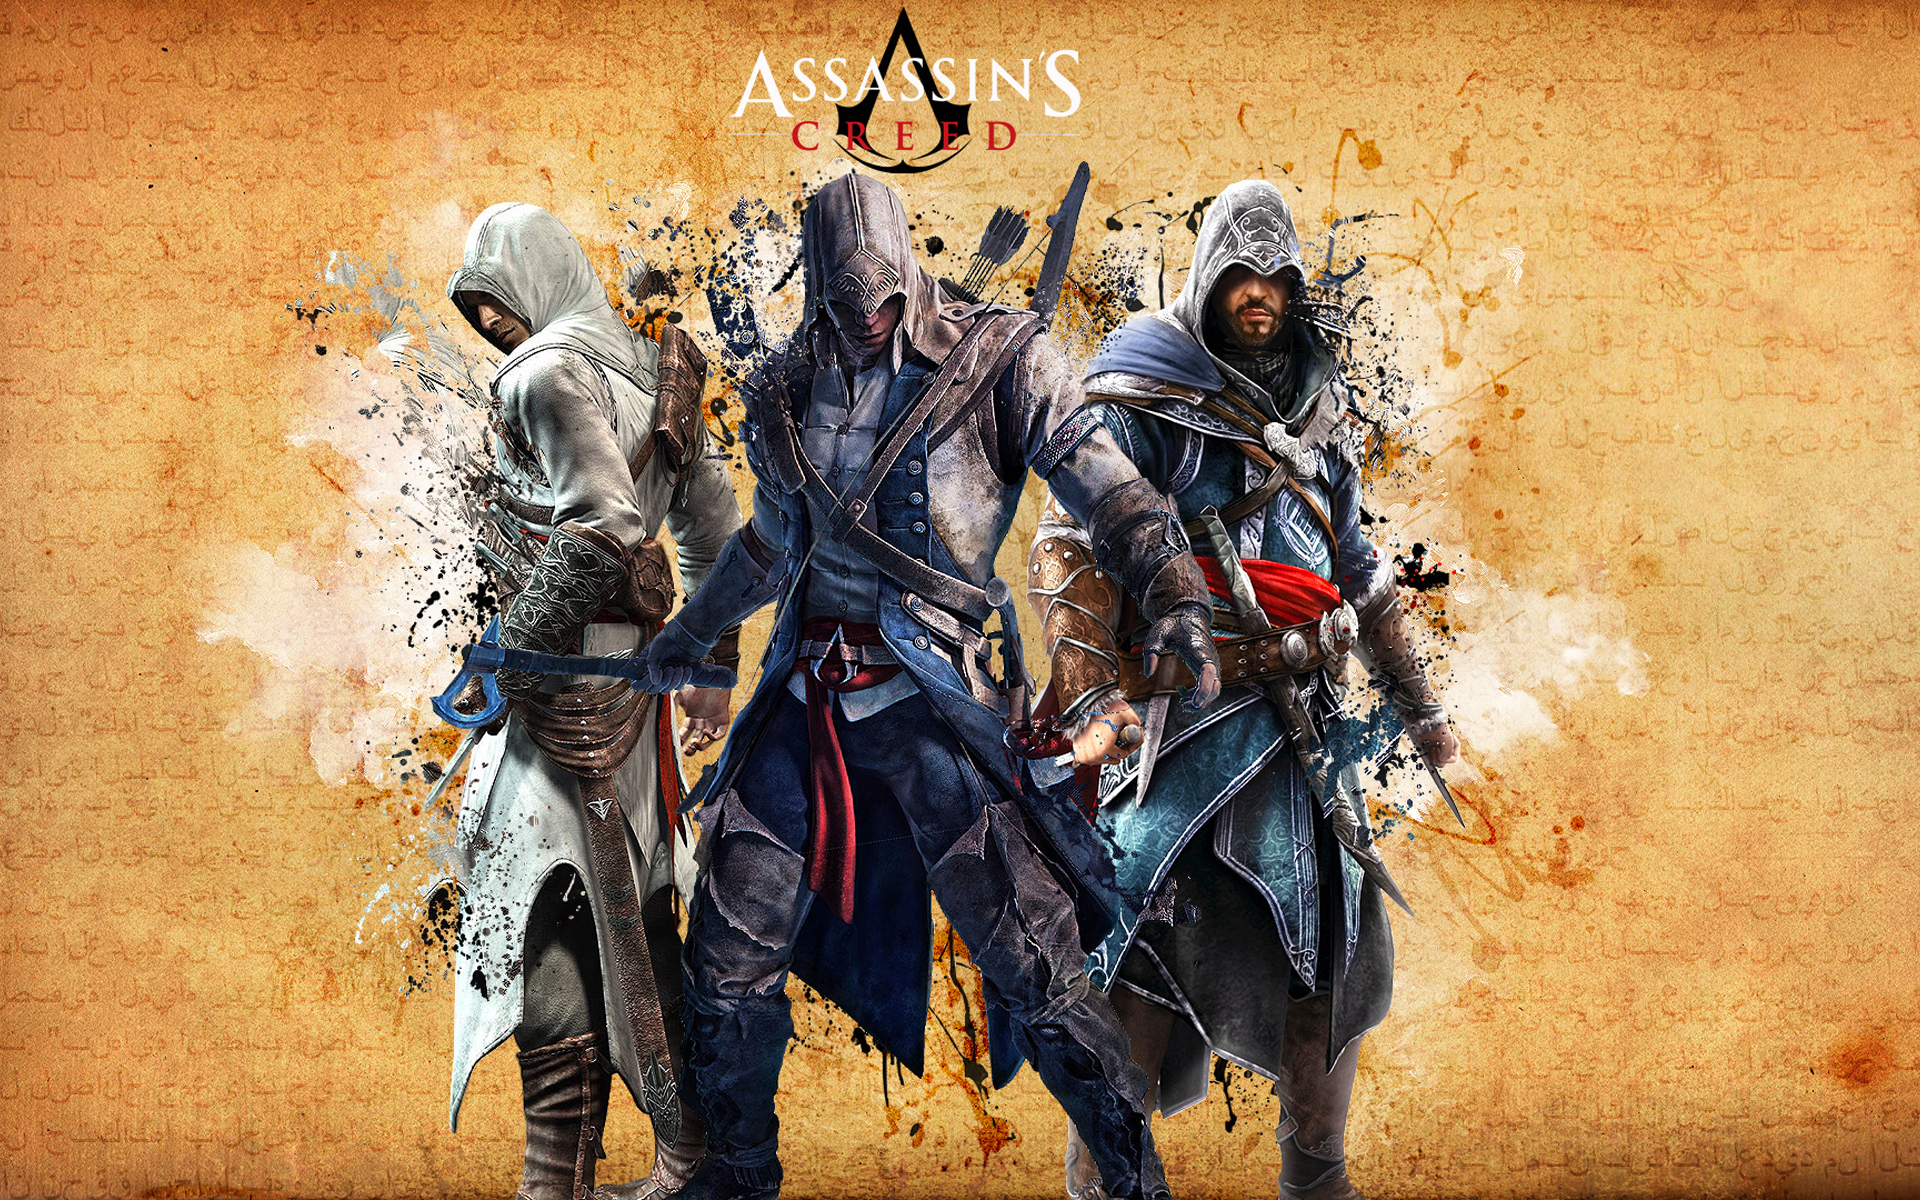 connor (assassin's creed), assassin's creed, video game, altair (assassin's creed), ezio (assassin's creed) phone wallpaper